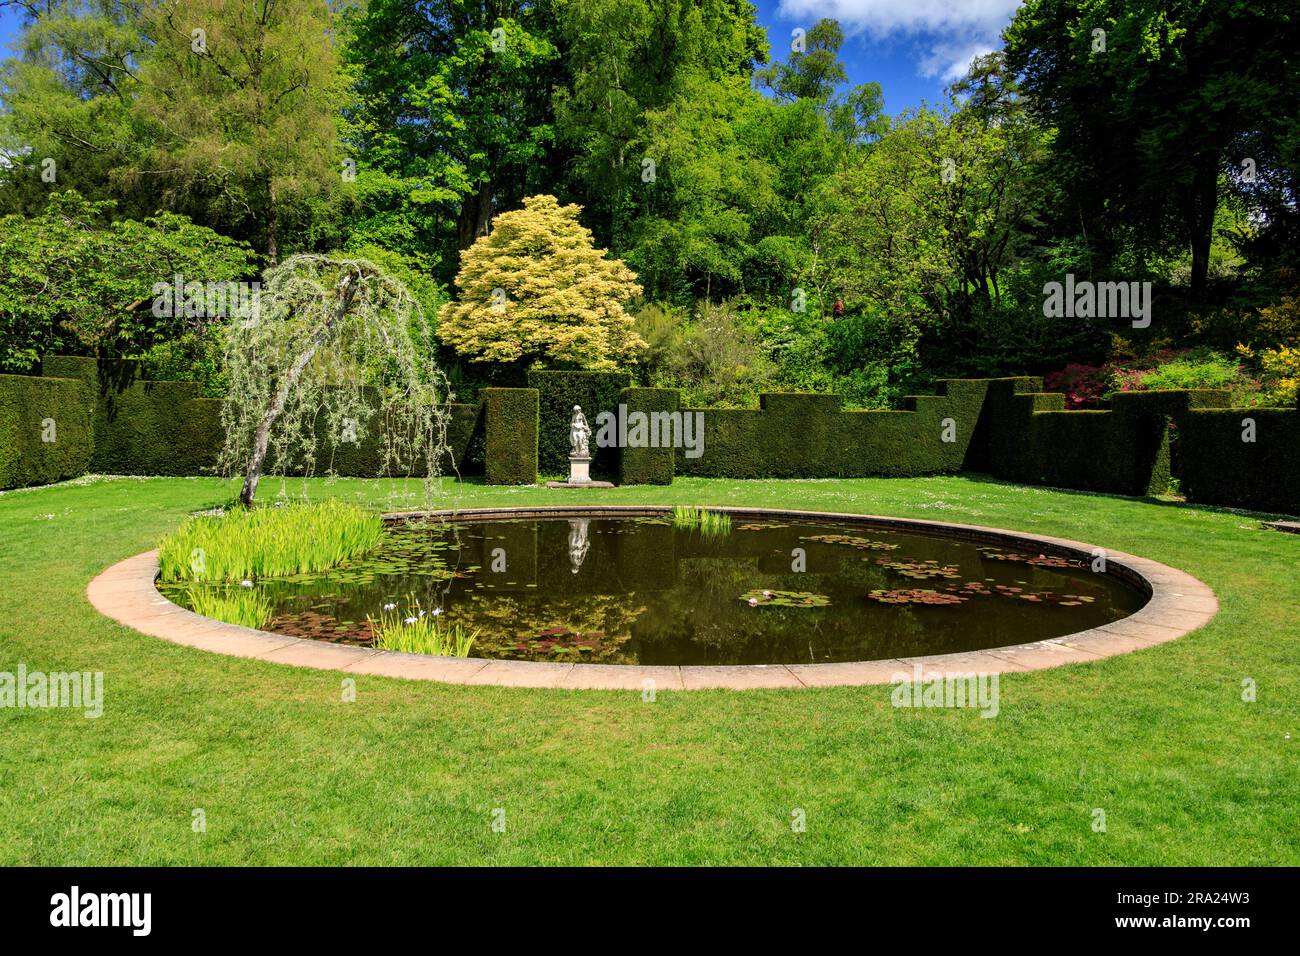 The peaceful tranquiity of the still waters inthe circular Pool Garden at Knightshayes Court, nr Tiverton, Devon, England, UK Stock Photo